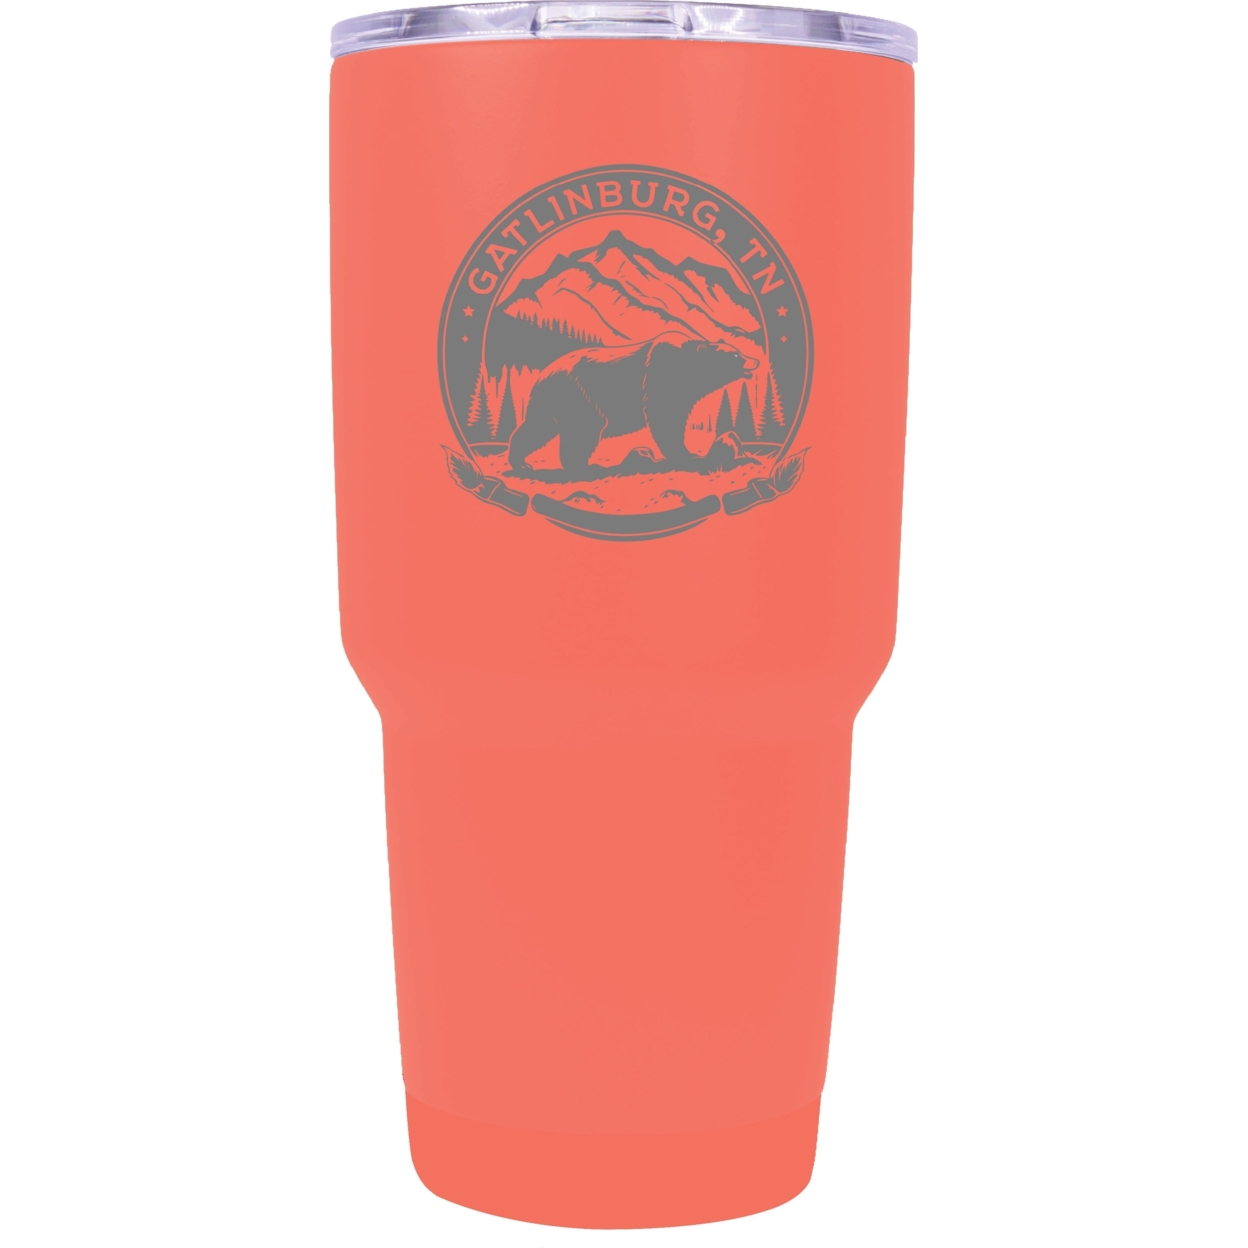 Gatlinburg Tennessee Laser Etched Souvenir 24 Oz Insulated Stainless Steel Tumbler - White